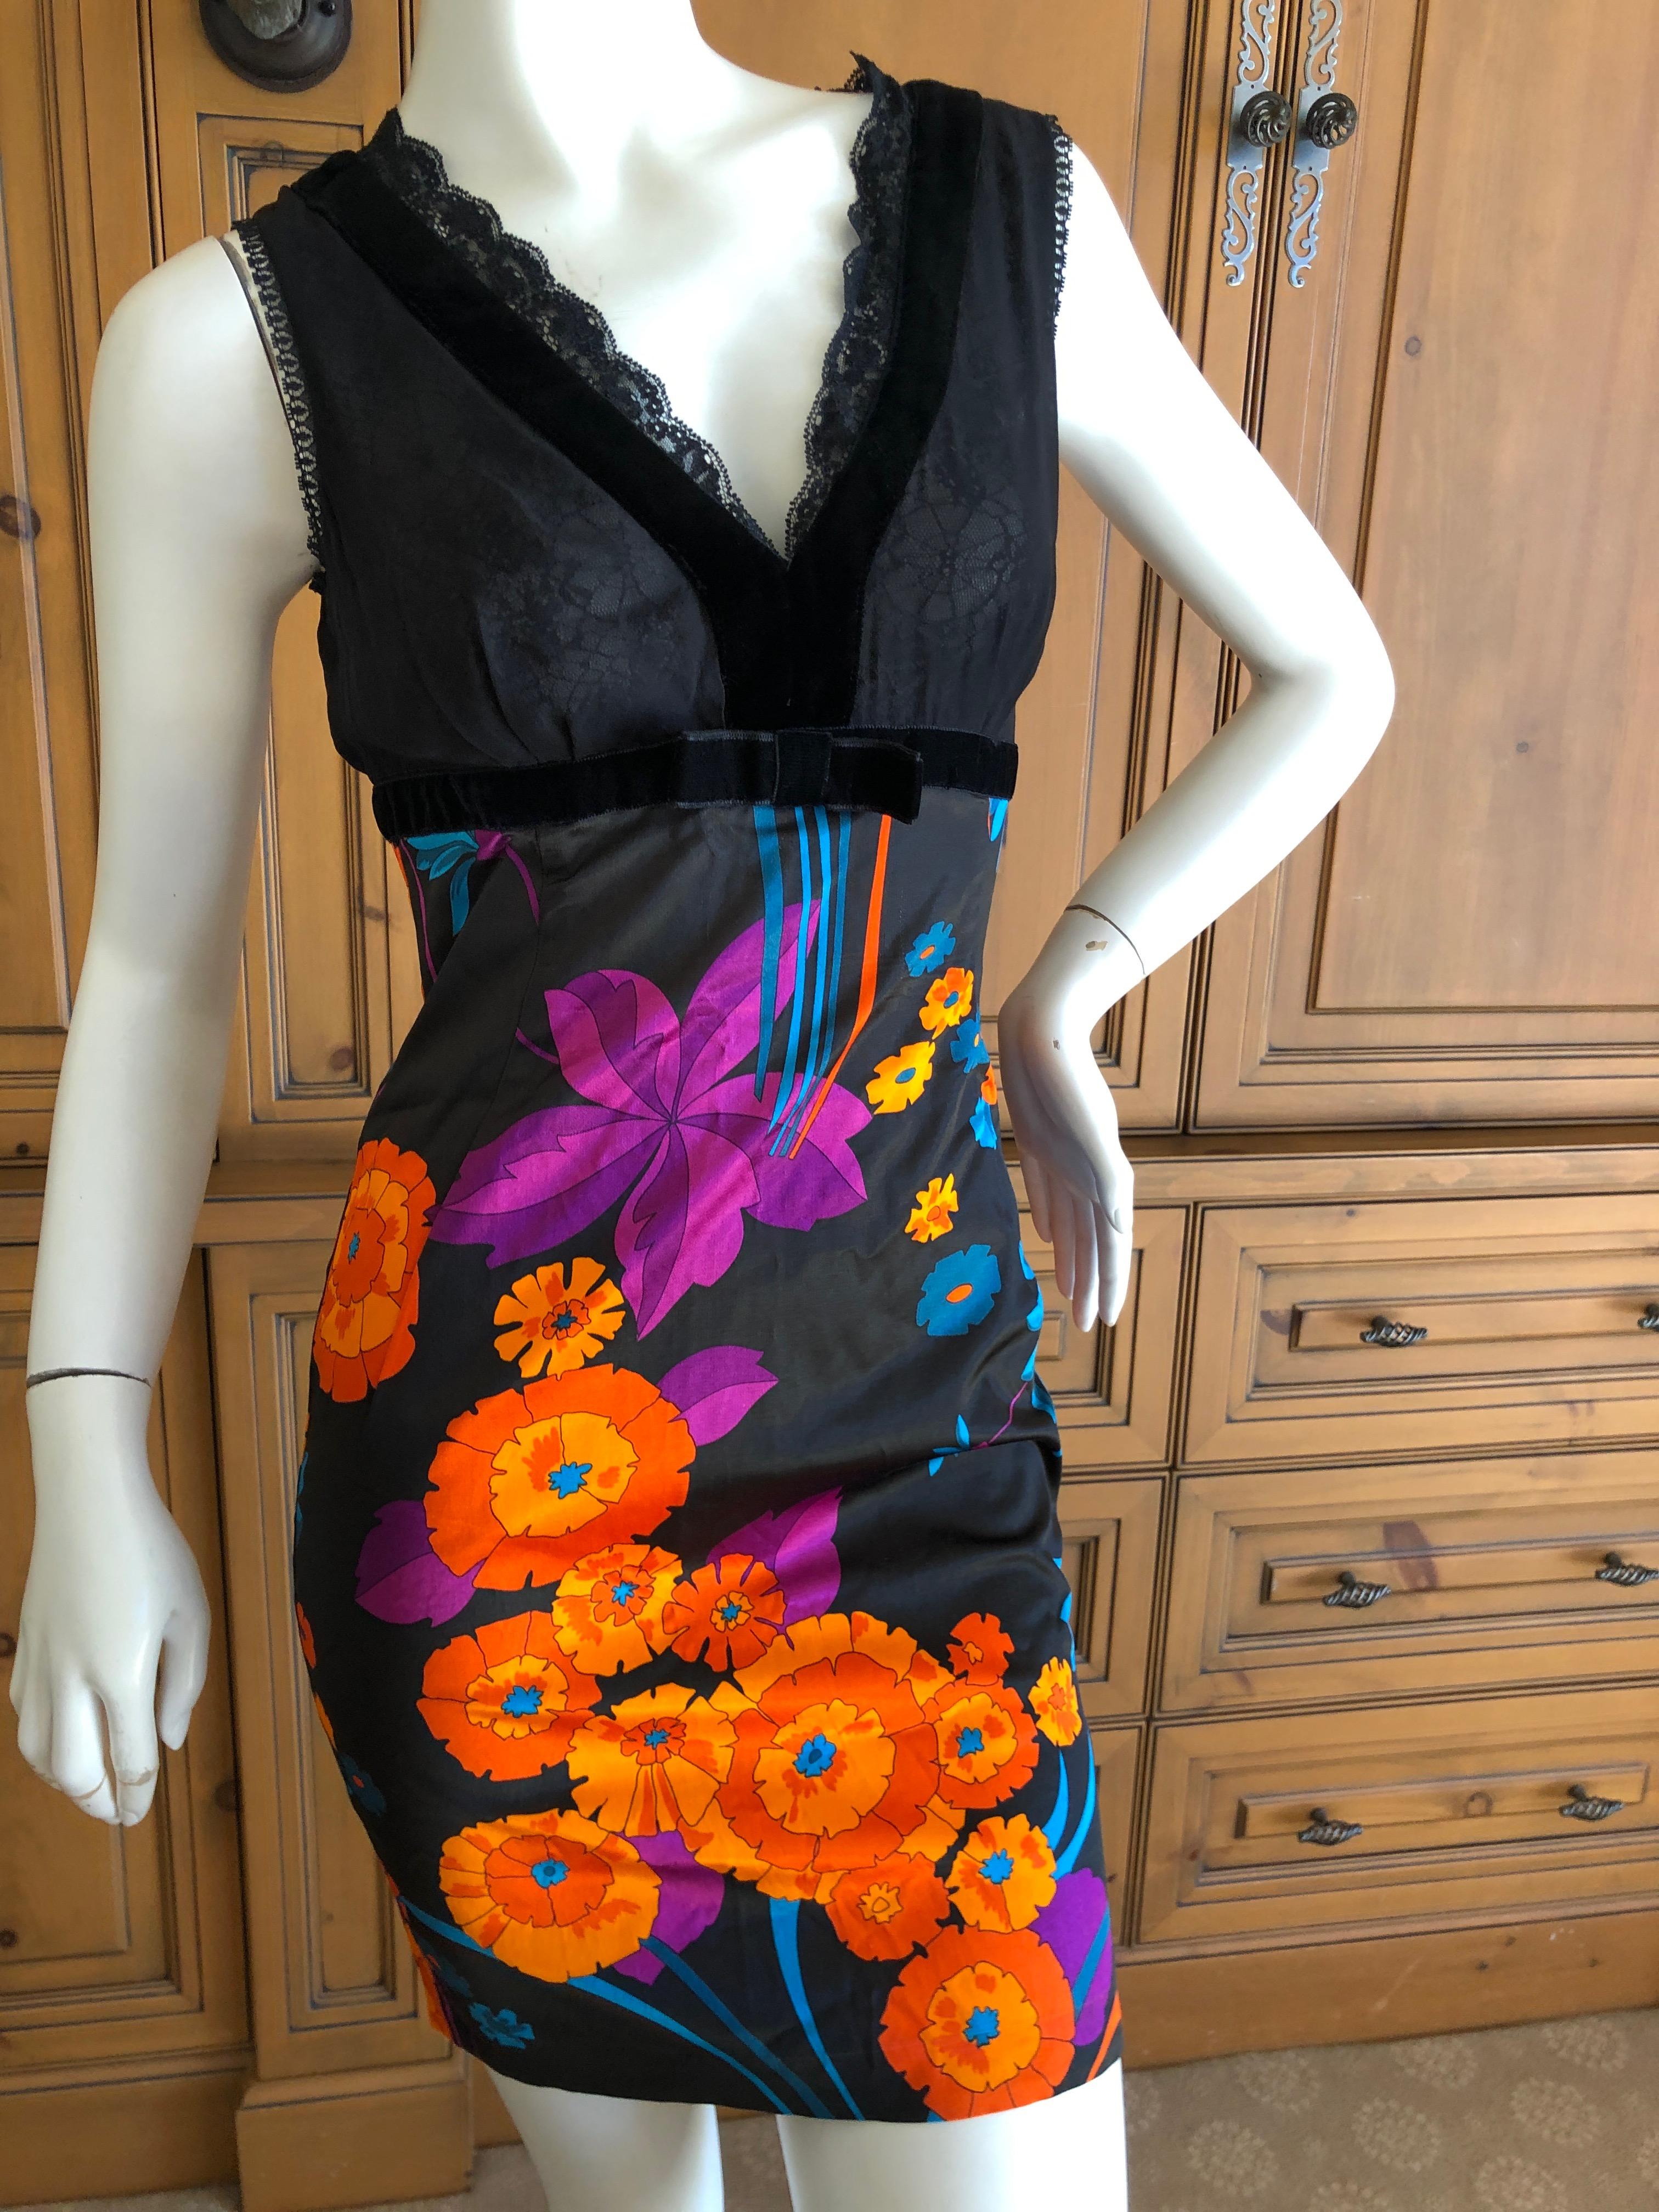 D&G Dolce & Gabbana Mod Print Cocktail Dress with Sheer Bust.
Please check measurements, Marked size 38
Bust 36'
Waist 26